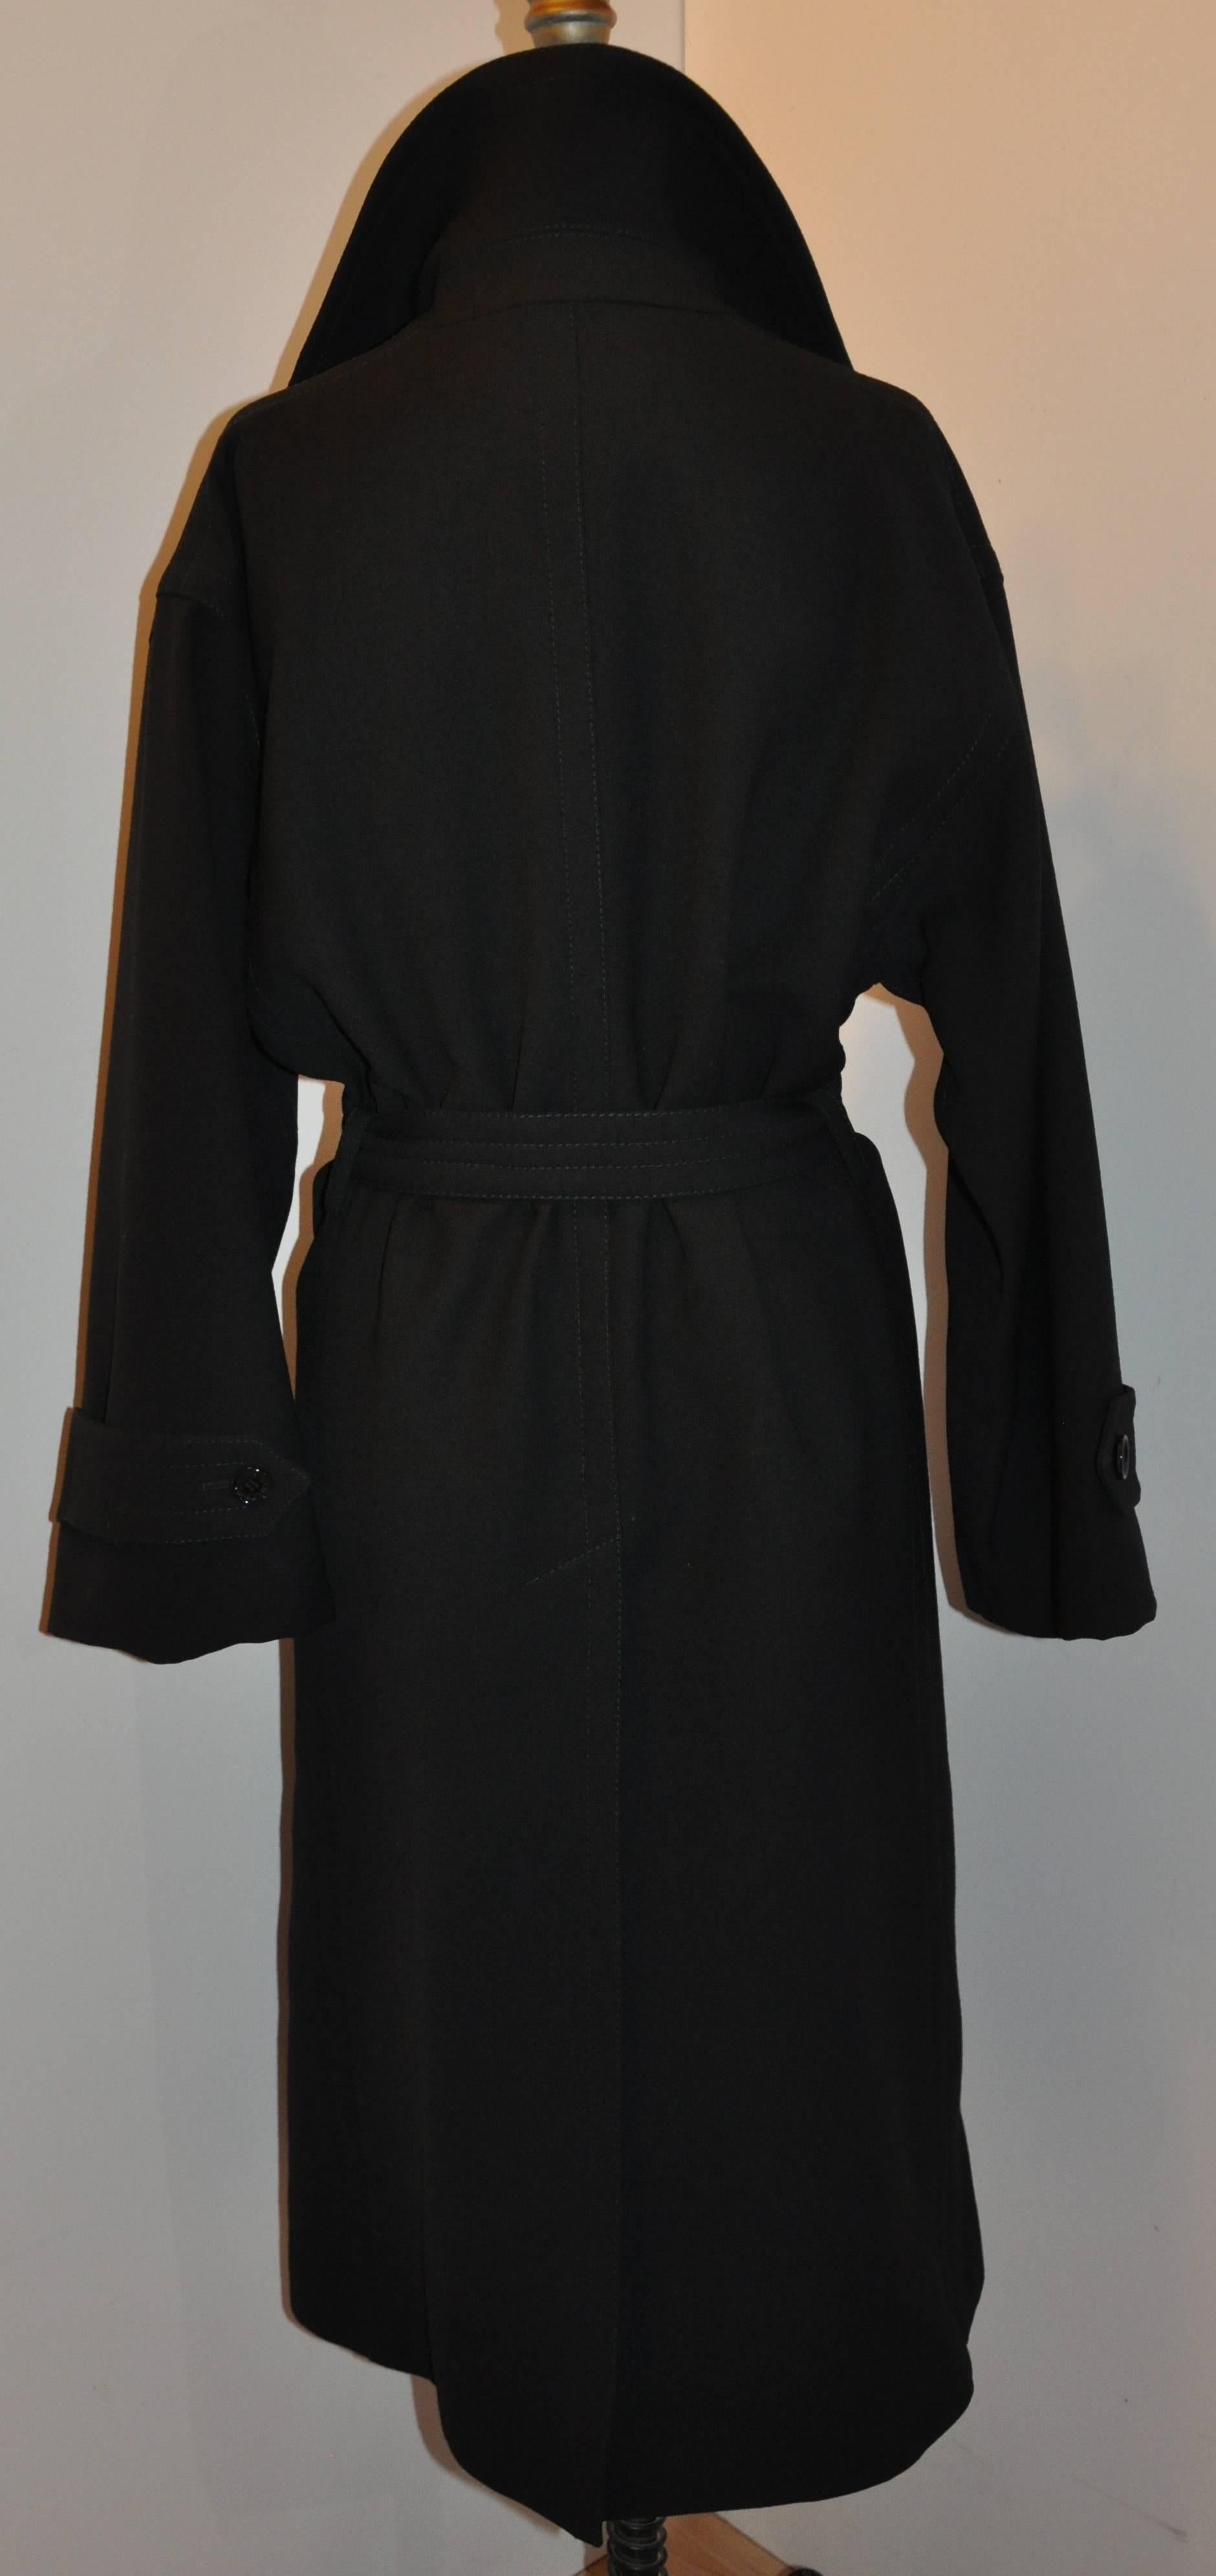        Dolce & Gabbana wonderfully elegant signature black wool gabardine trench coat with matching self-tie belt measures 45 inches in length. The front has two set-in pockets and the center back a long flat vent. Detailed top stitching throughout